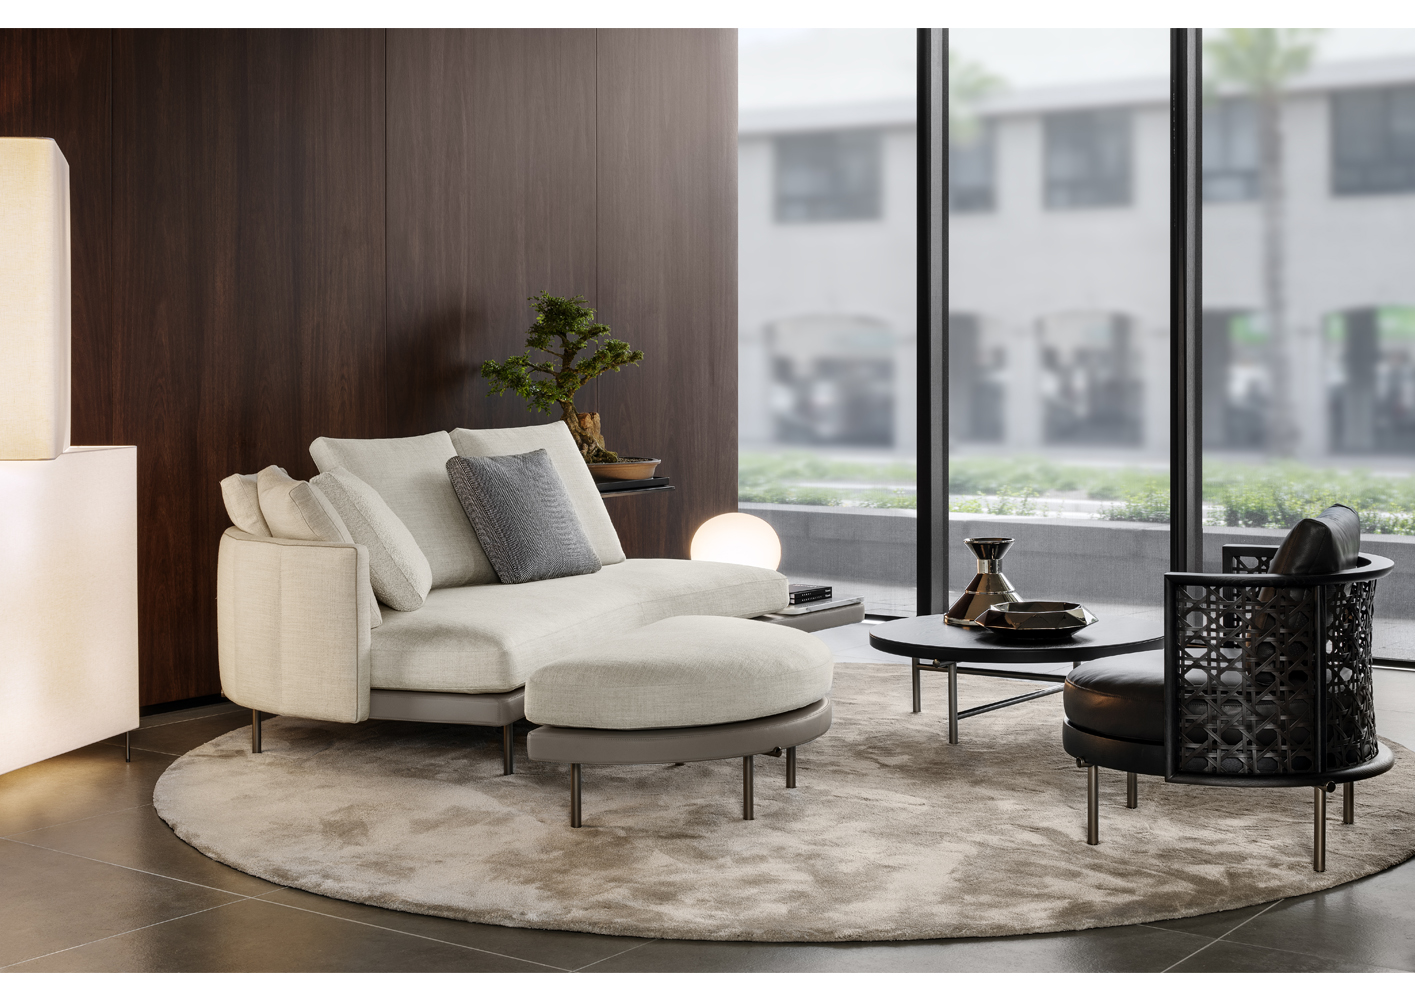 Minotti Cape Town by Limeline